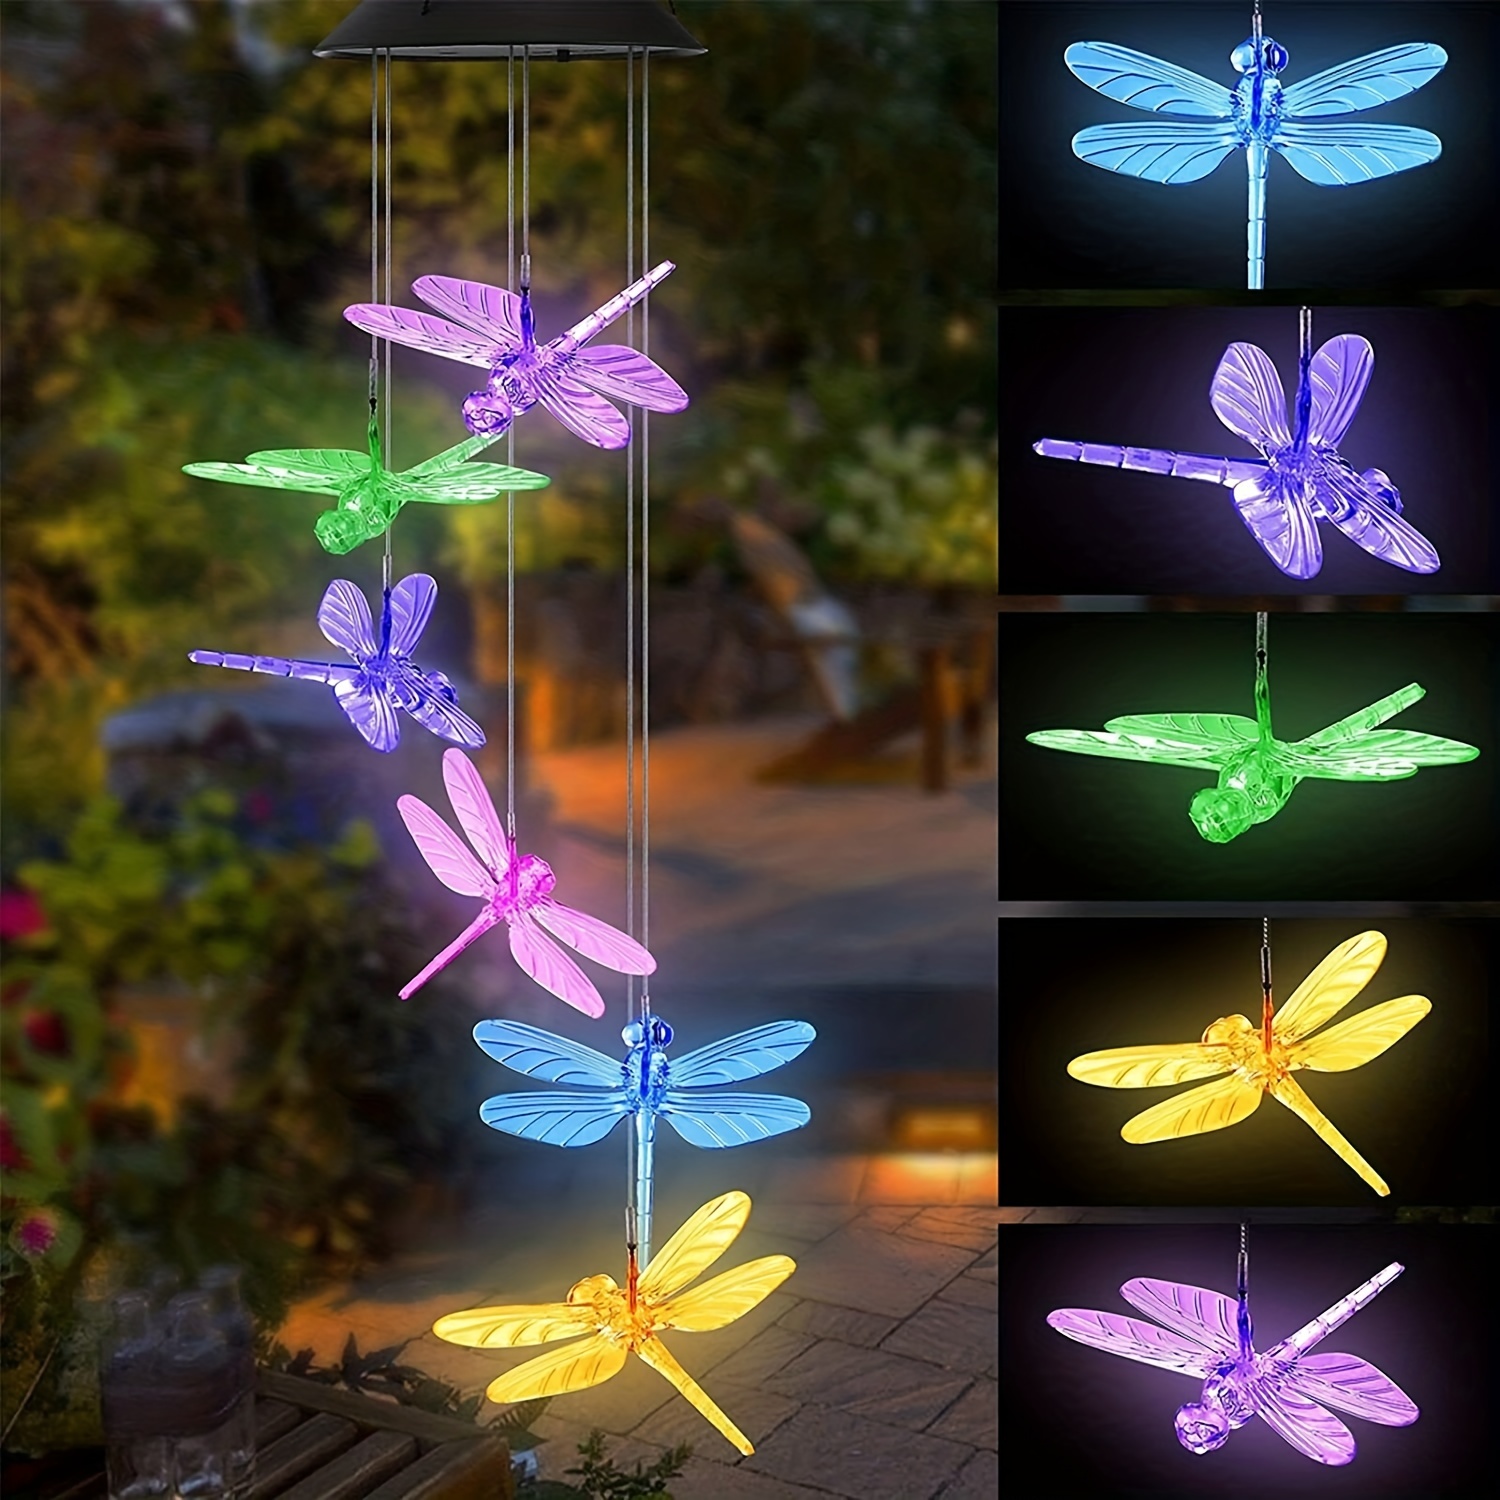 

1pc Solar Wind Chimes Lights, Waterproof Green Dragonfly Shape Color Changing Lights, Romantic Wind Bell Light Led Solar Mobile Hanging Decor For Garden Patio